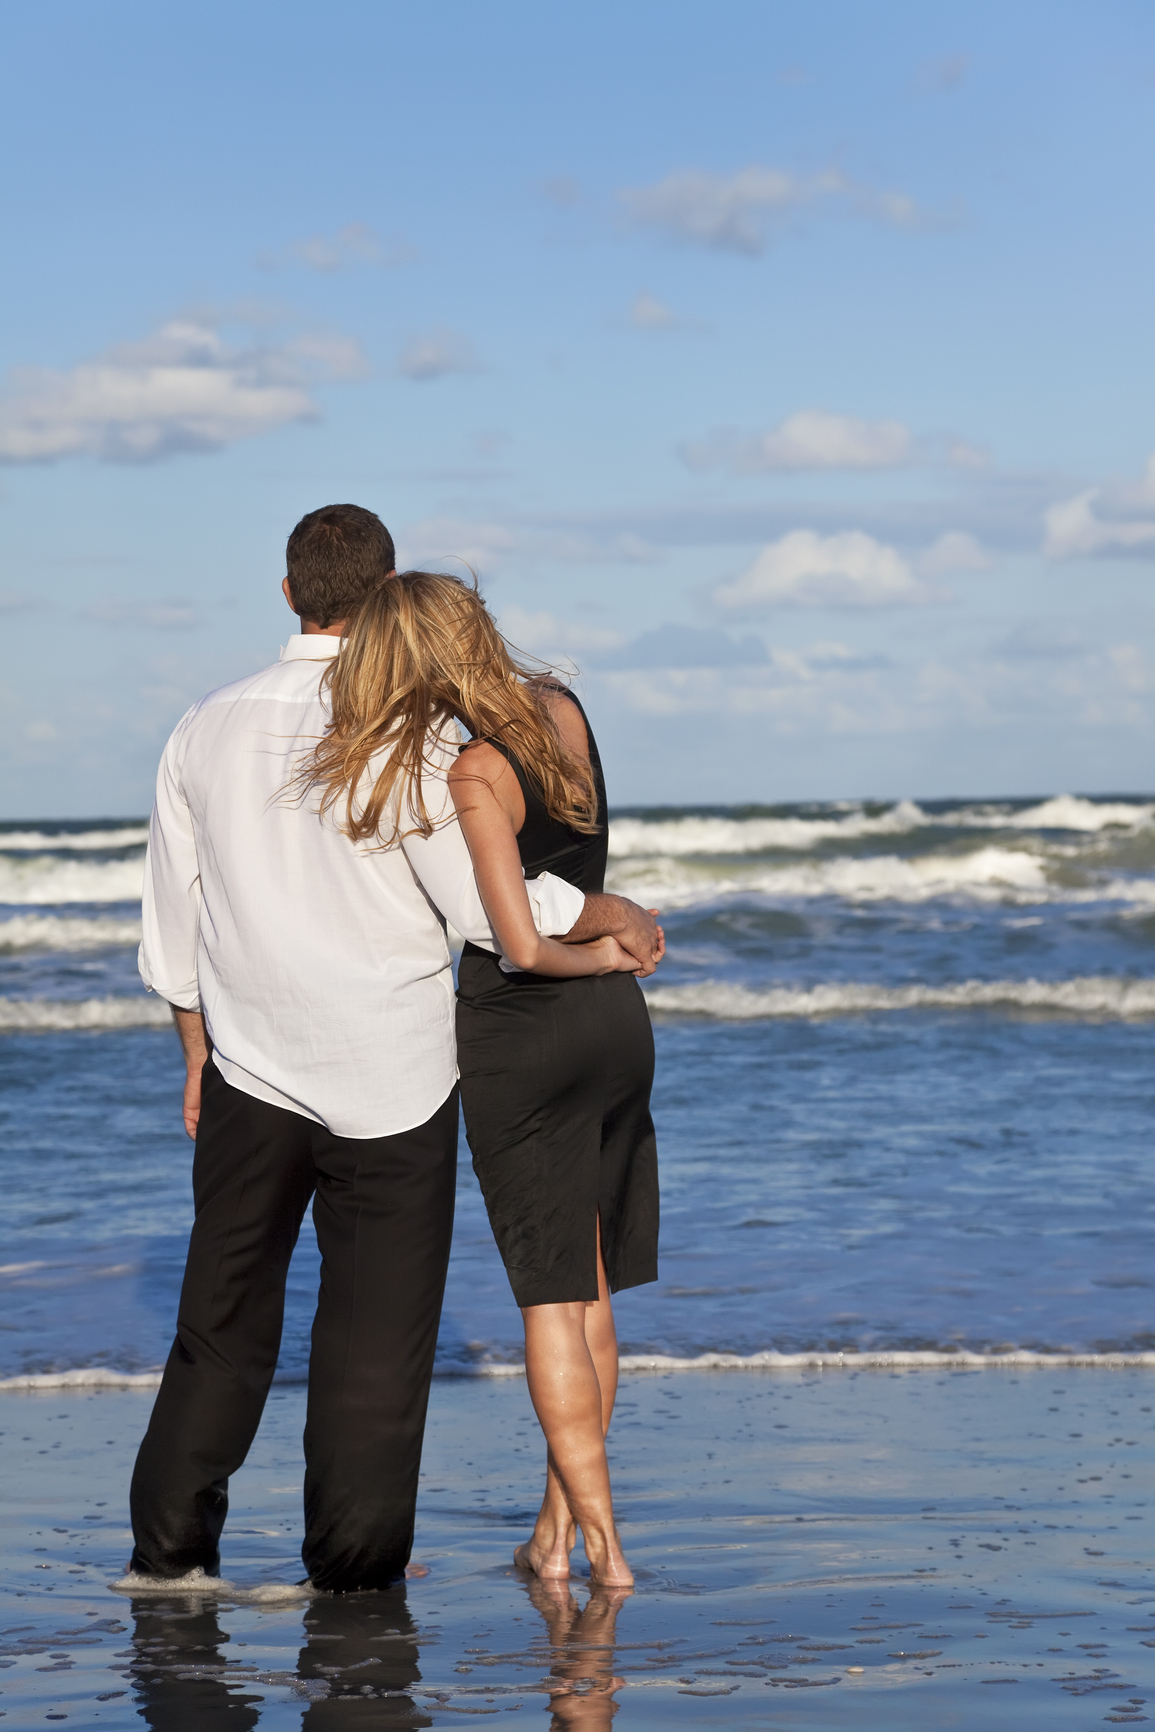 A young man and woman embracing as a romantic couple on a beach with a bright blue sky